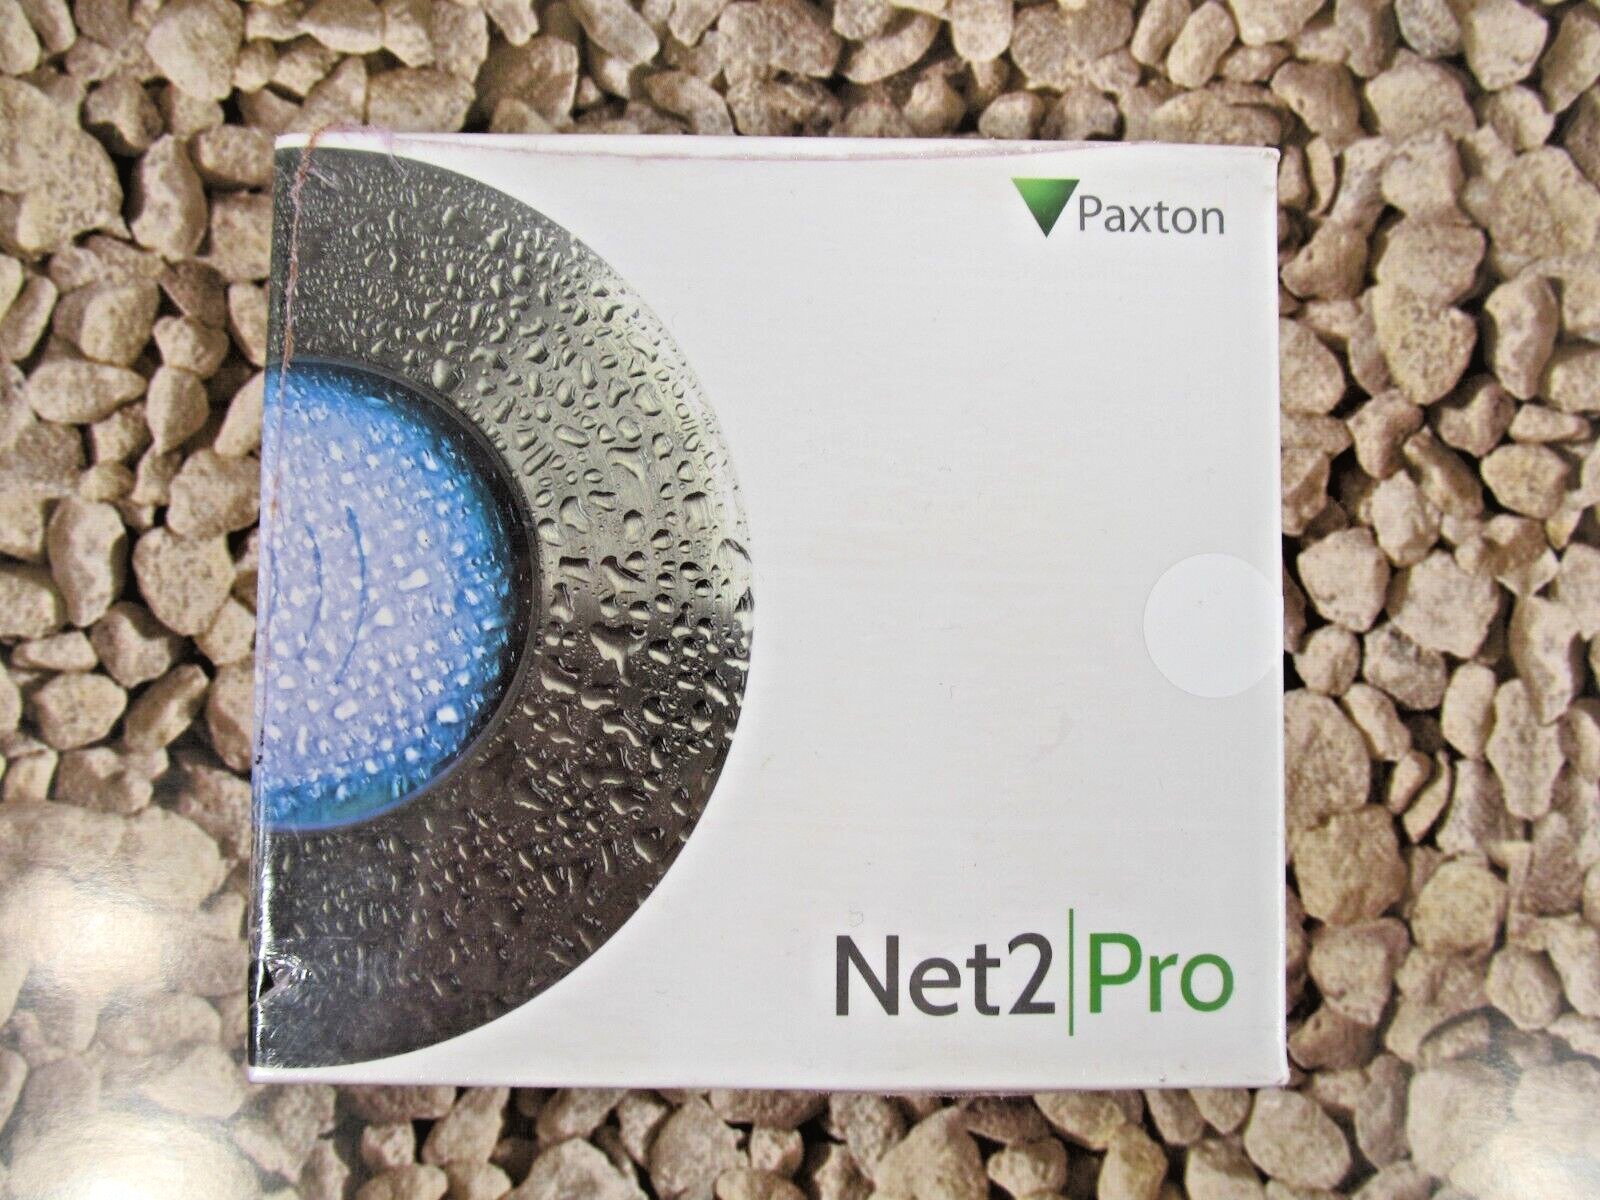 Paxton Net2 Pro Software DVD v5.00 New Sealed Charity